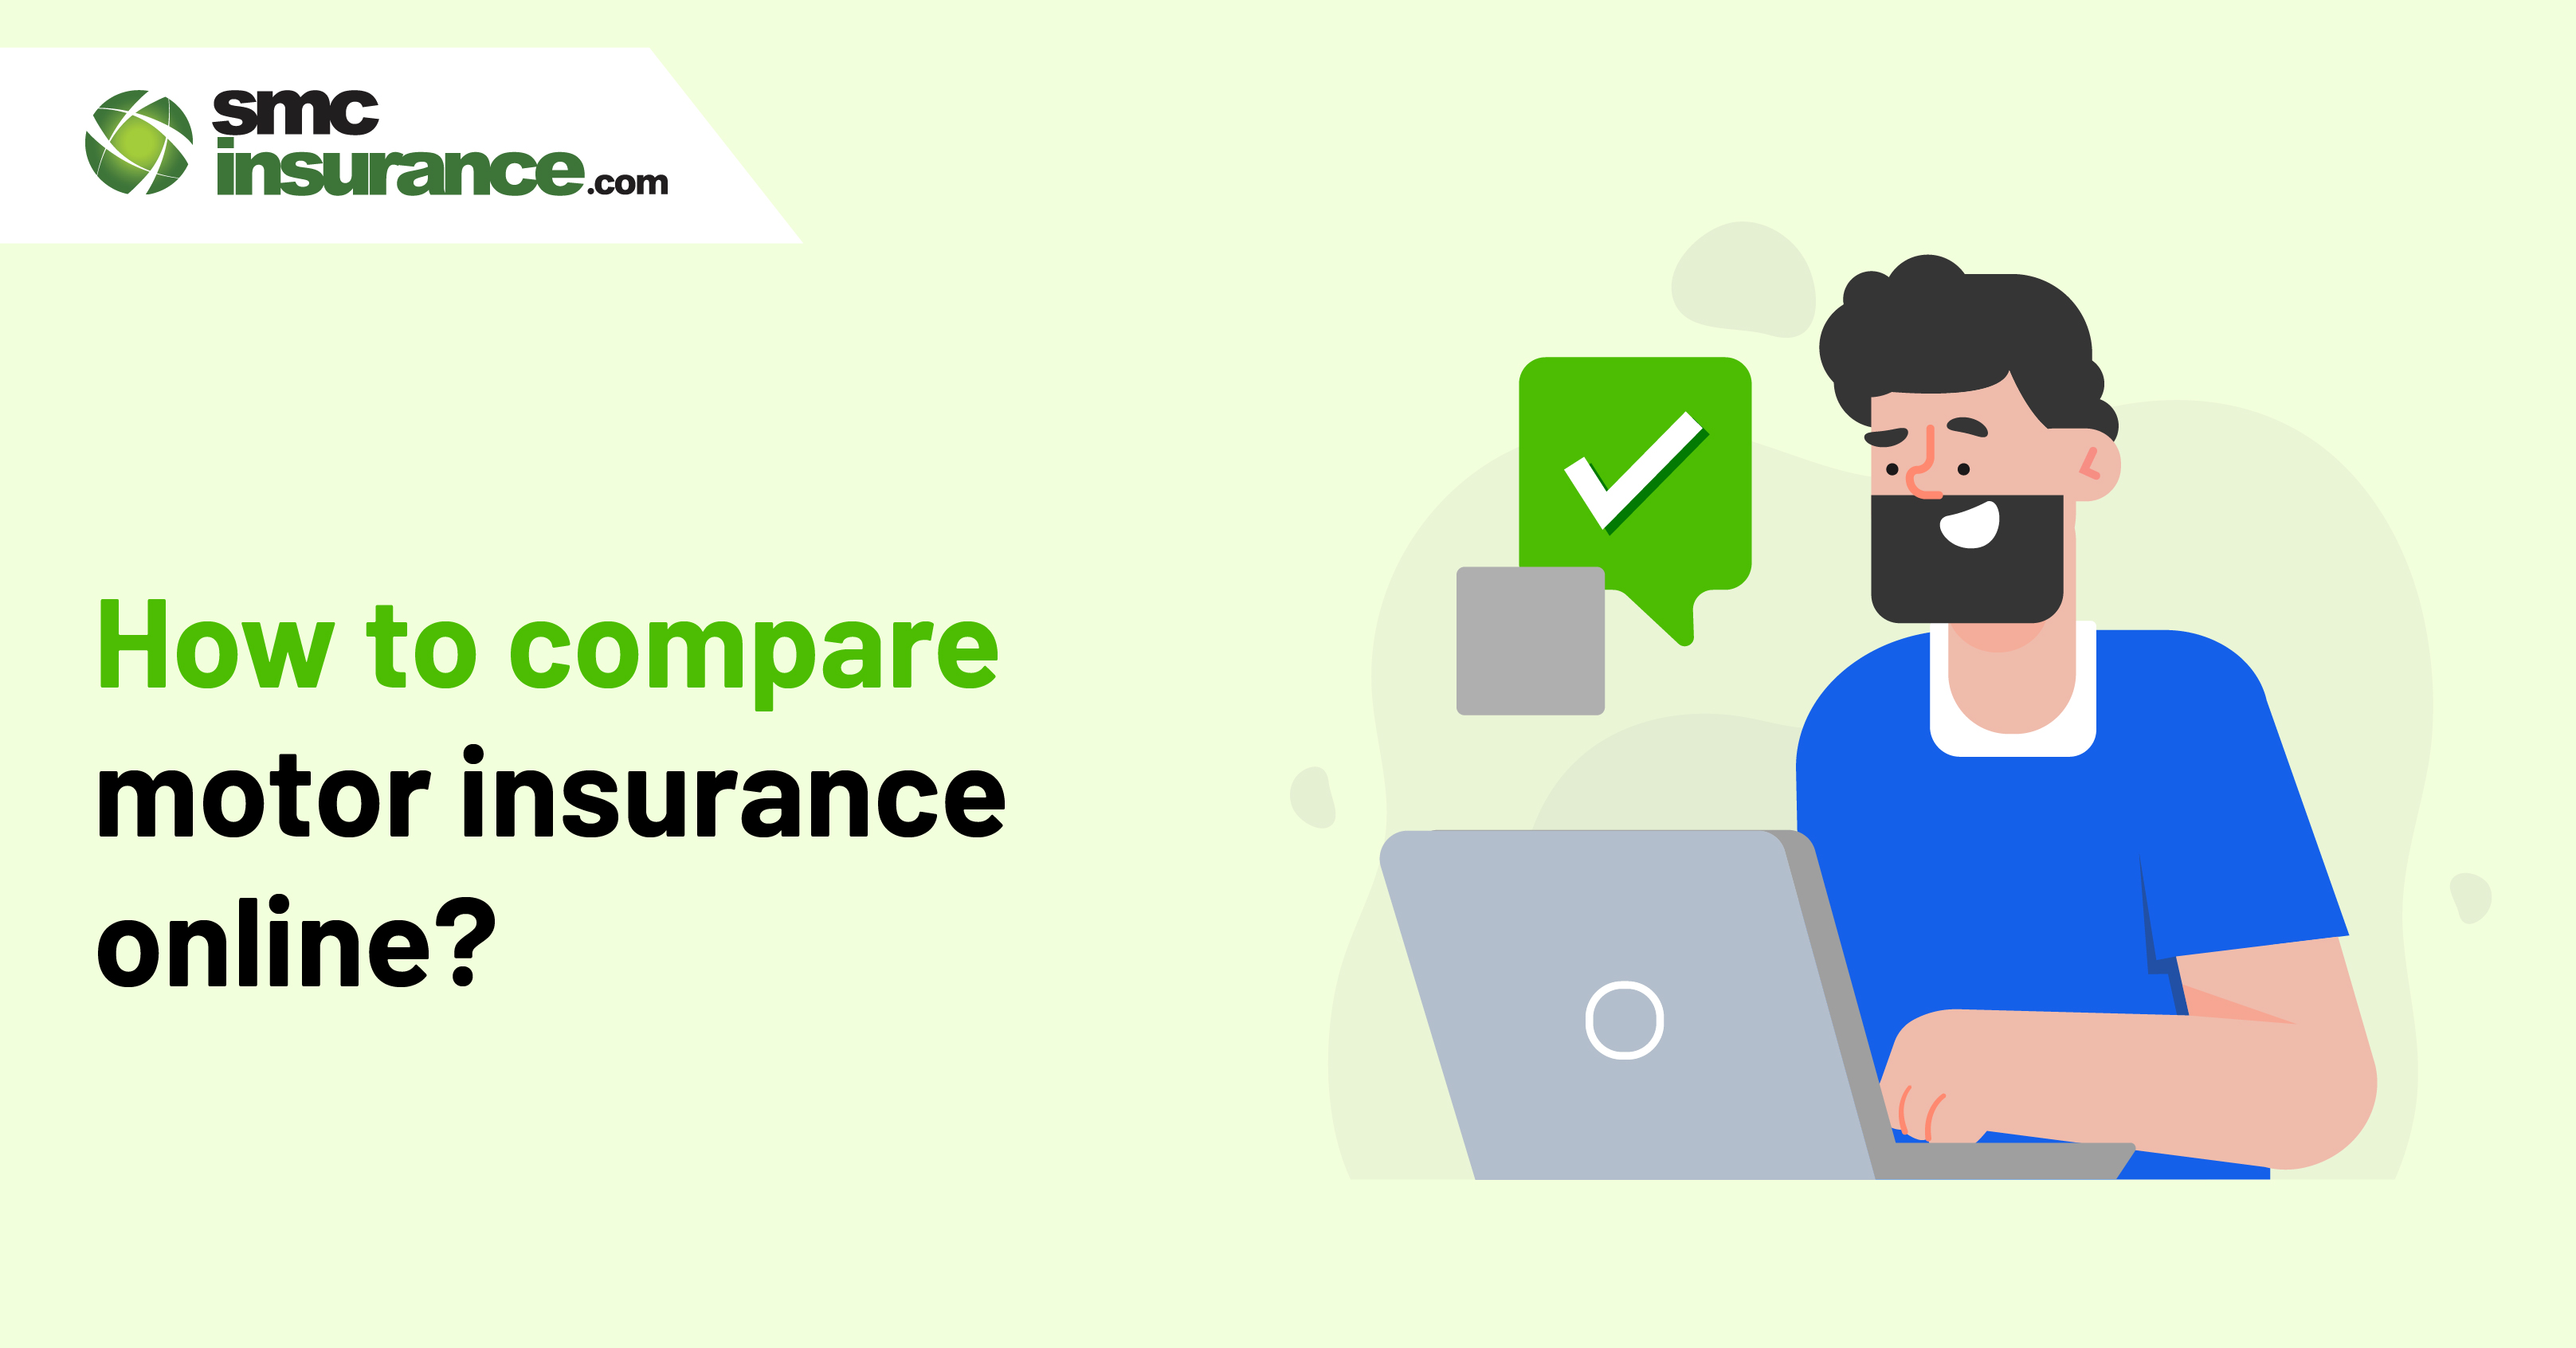 How To Compare Motor Insurance Online?